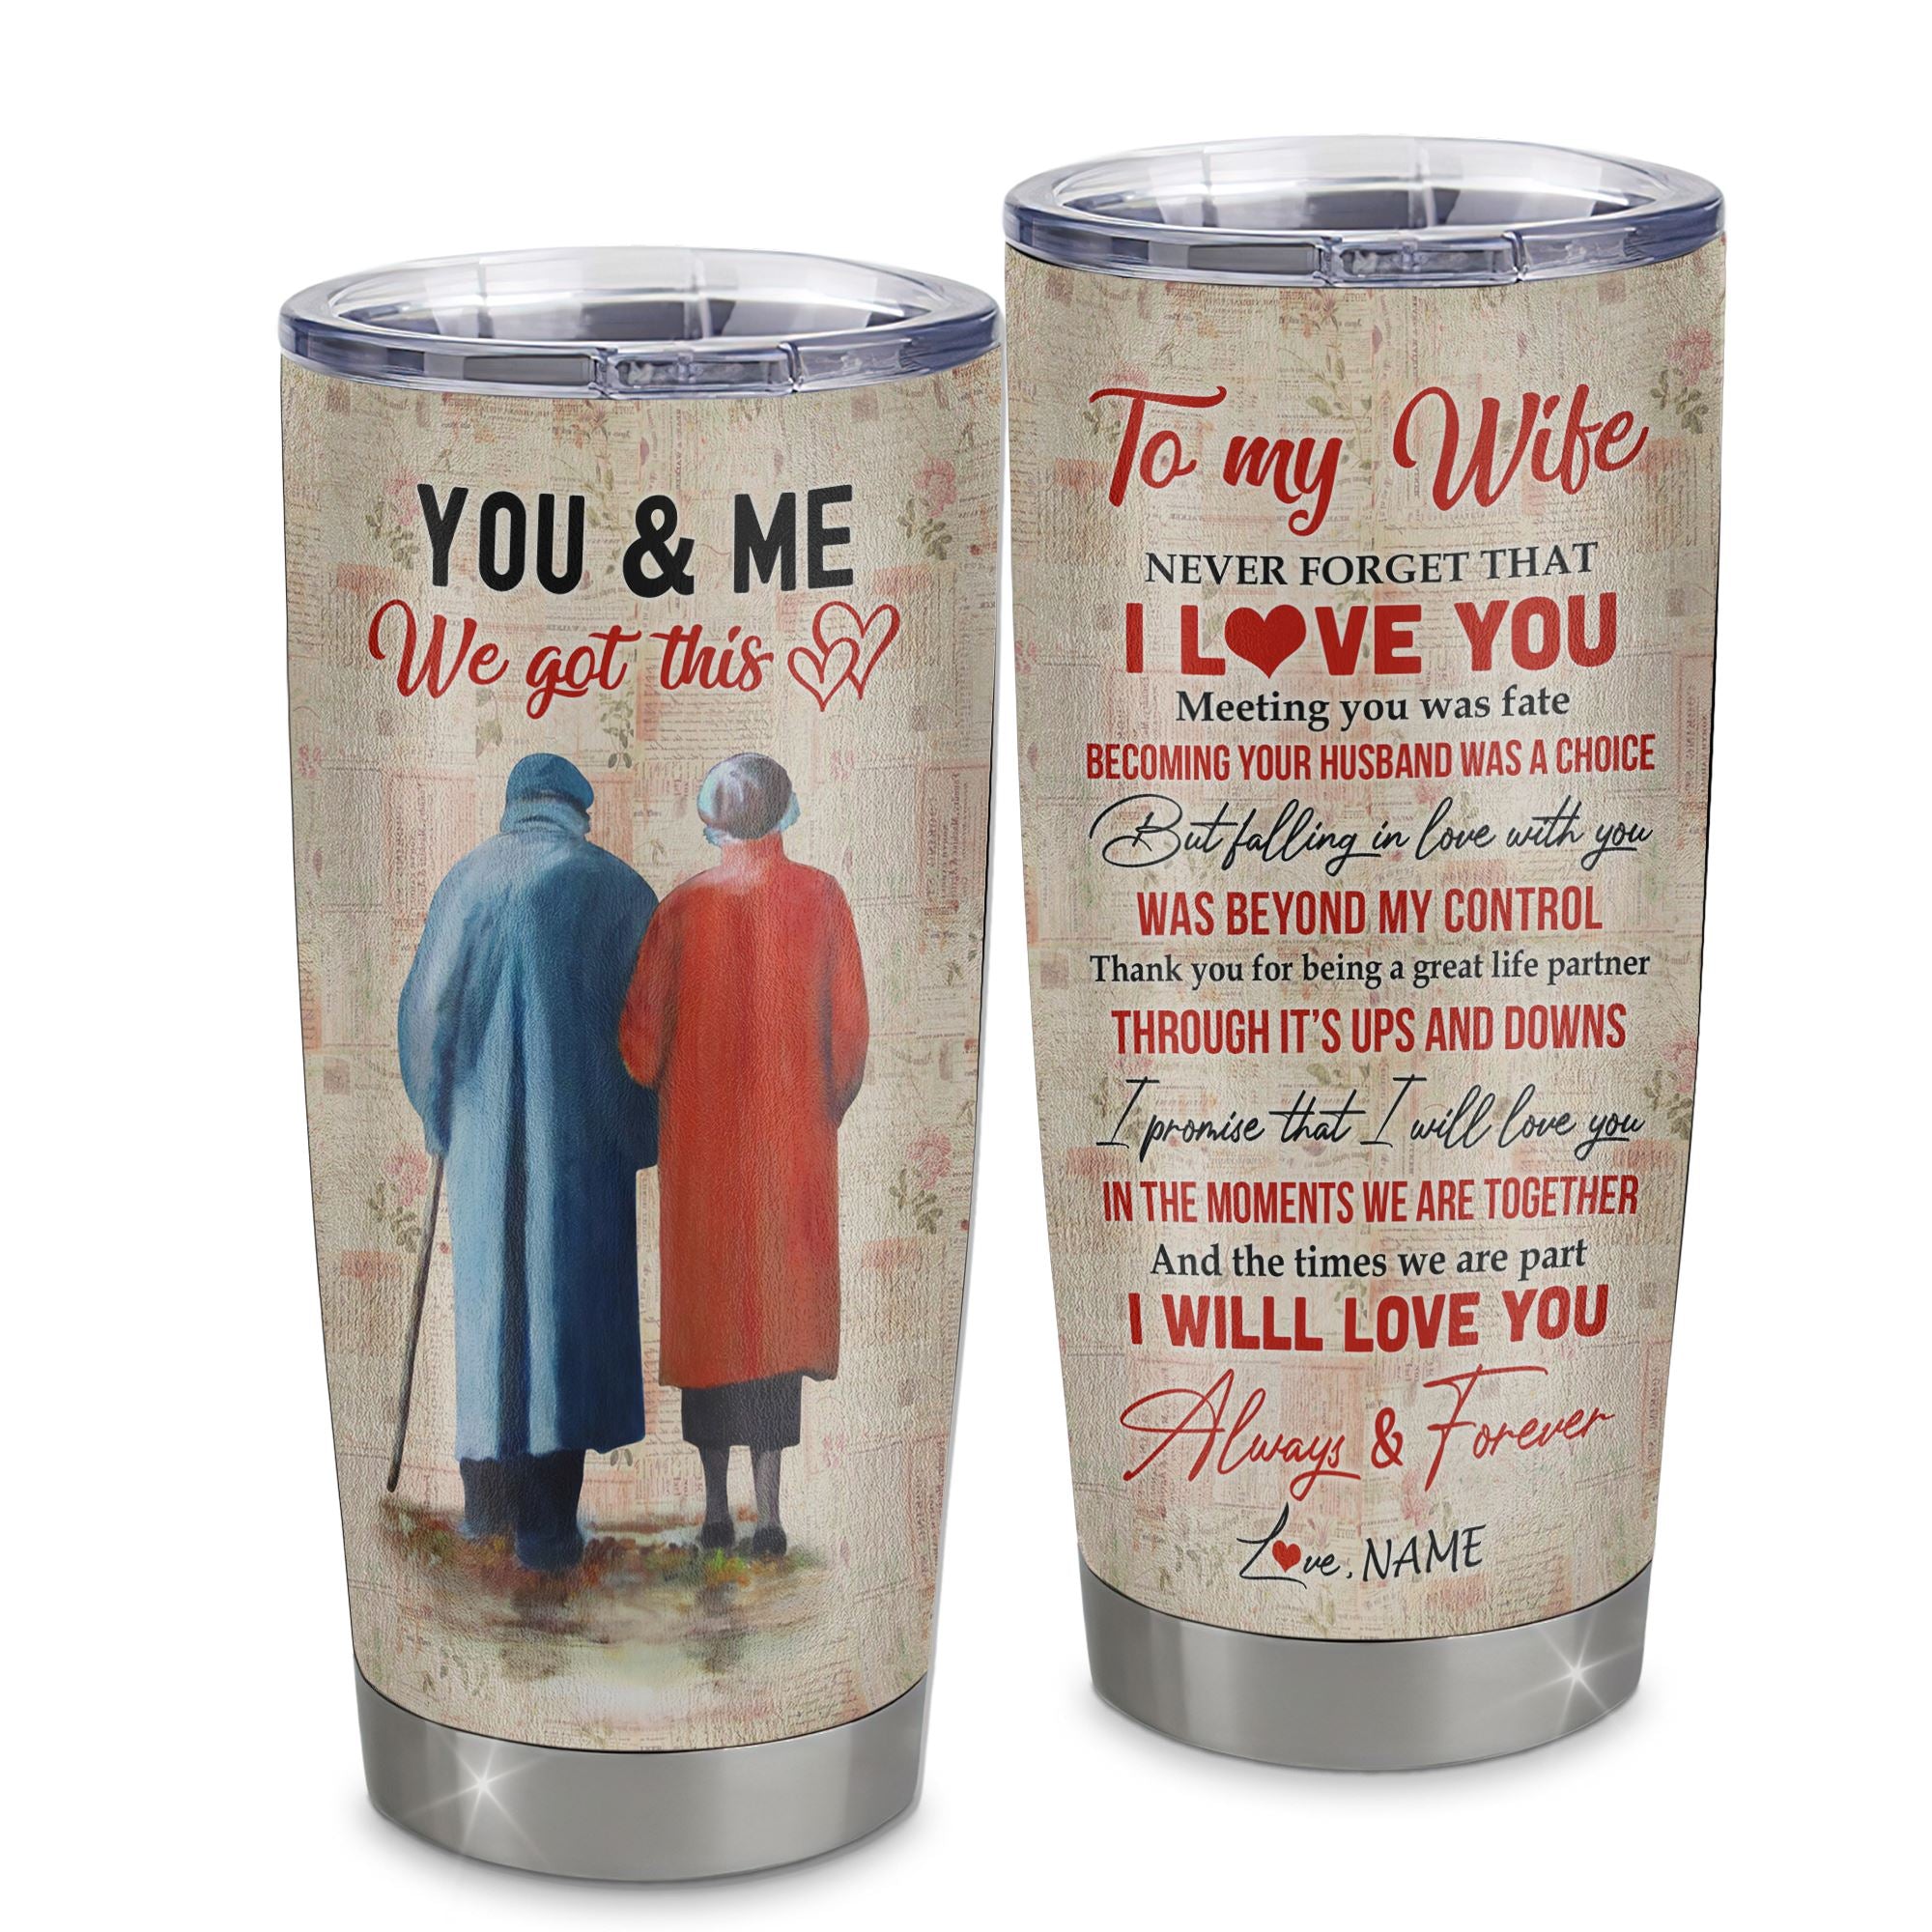 Personalized_To_My_Wife_From_Husband_Stainless_Steel_Tumbler_Cup_You_And_Me_We_Got_This_Never_Forget_I_Love_You_Wife_Birthday_Wedding_Valentines_Day_Christmas_Travel_Mug_Tumbler_mocku-1.jpg